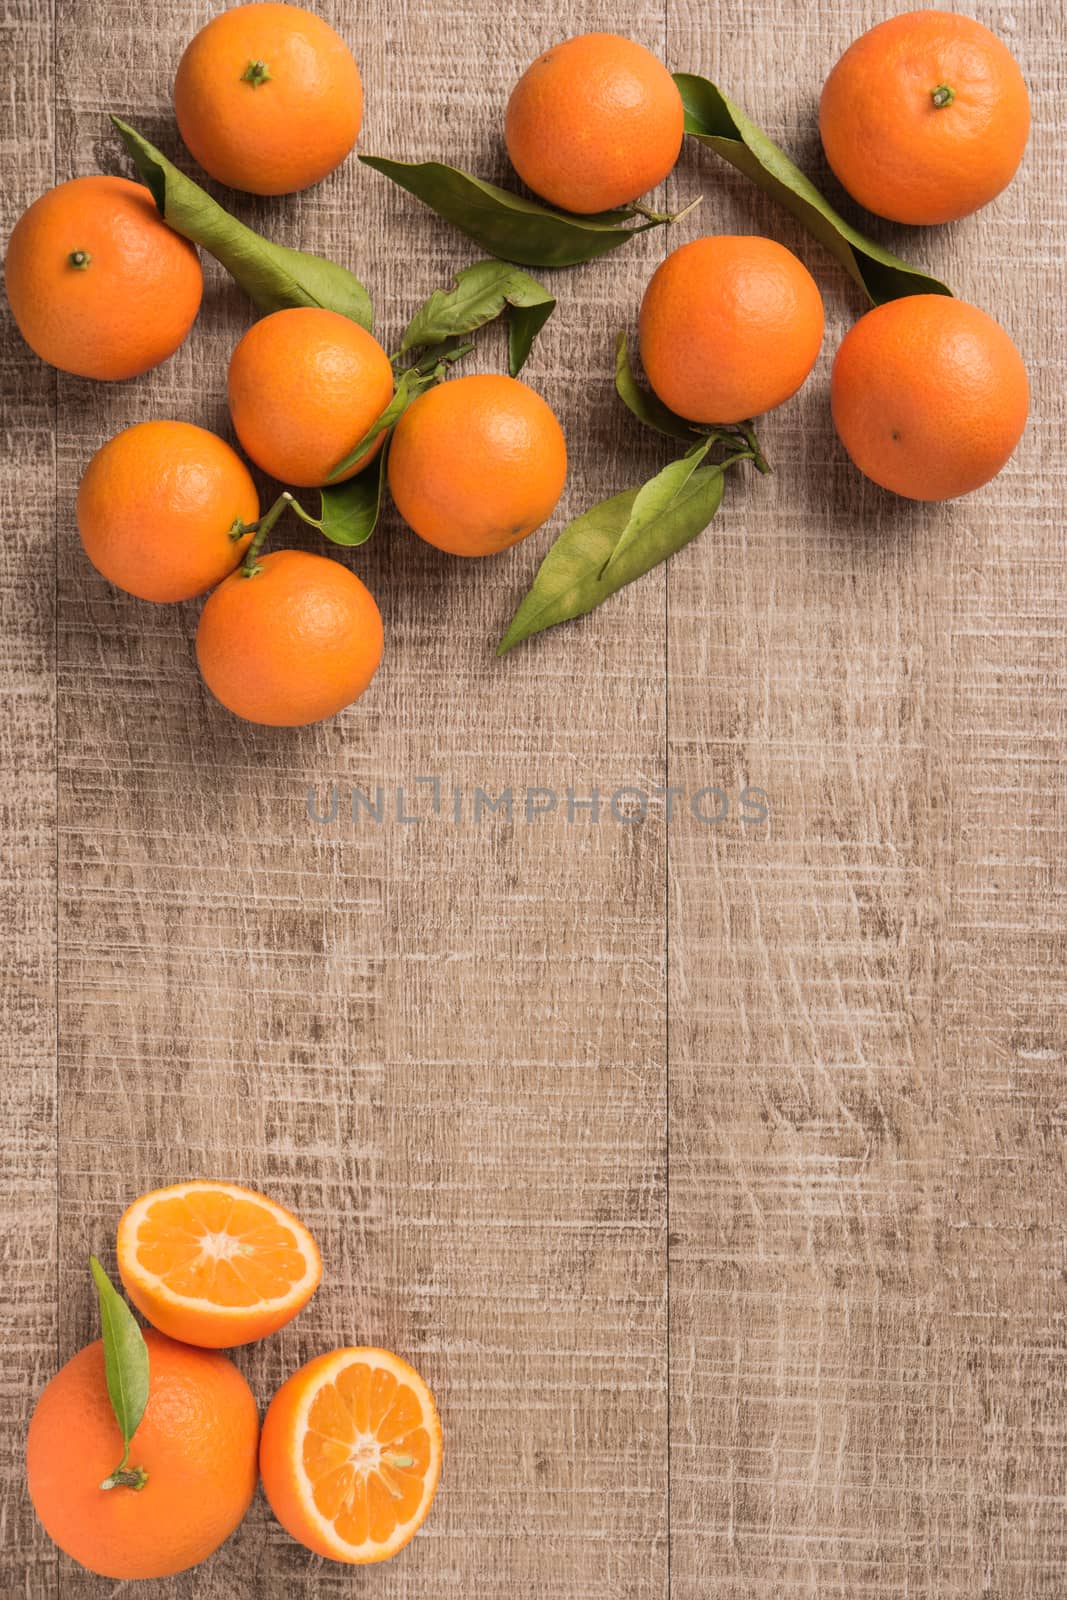 Fresh clementines on wooden board with leaves. Top view with copy space.